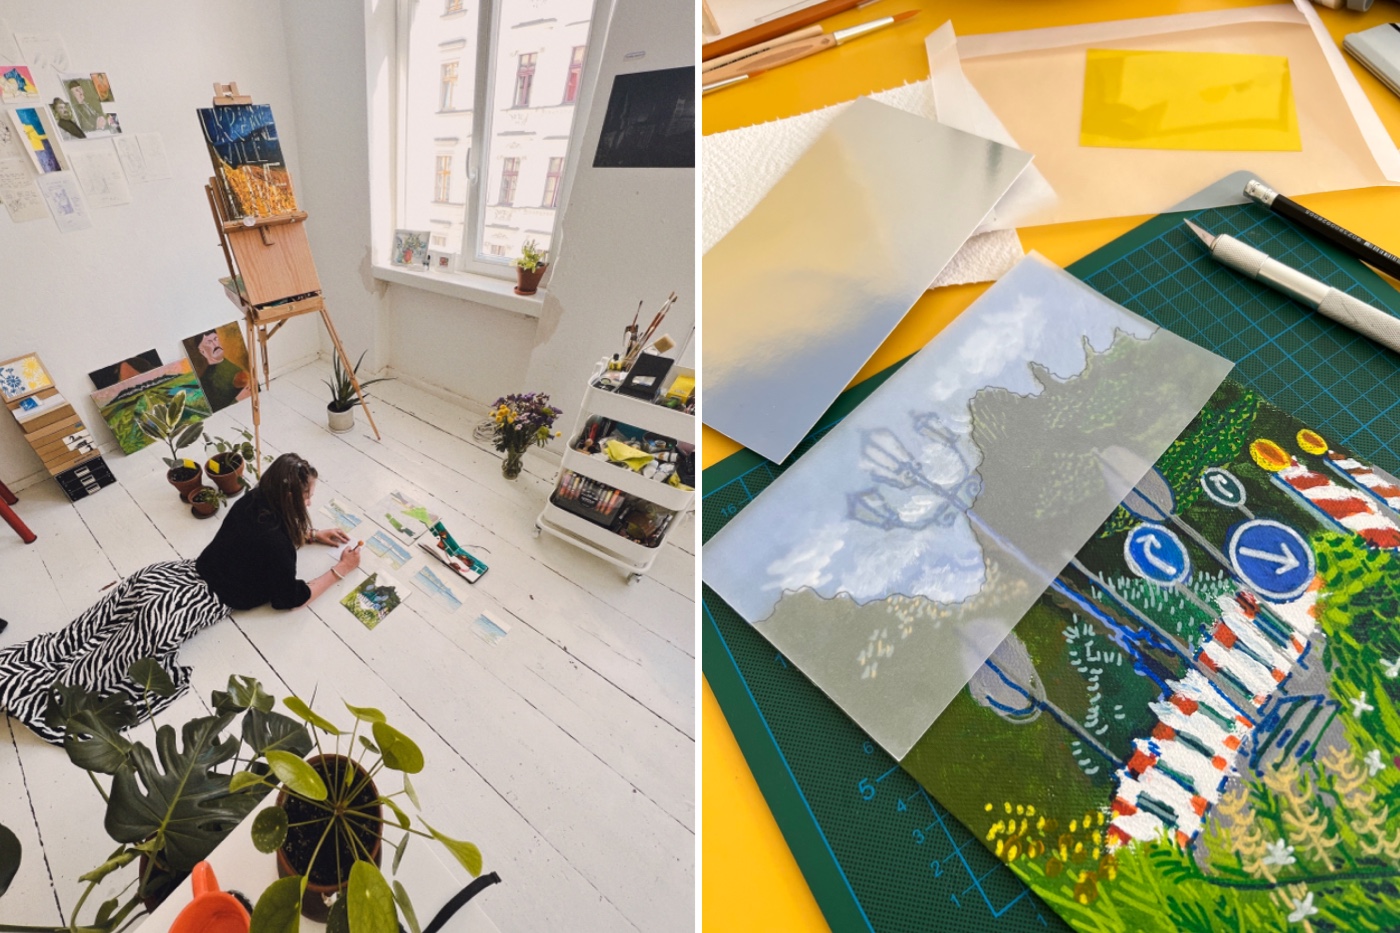 On the left: artist working at the floor of her studio surrounded by plants. On the right: artwork in progress.